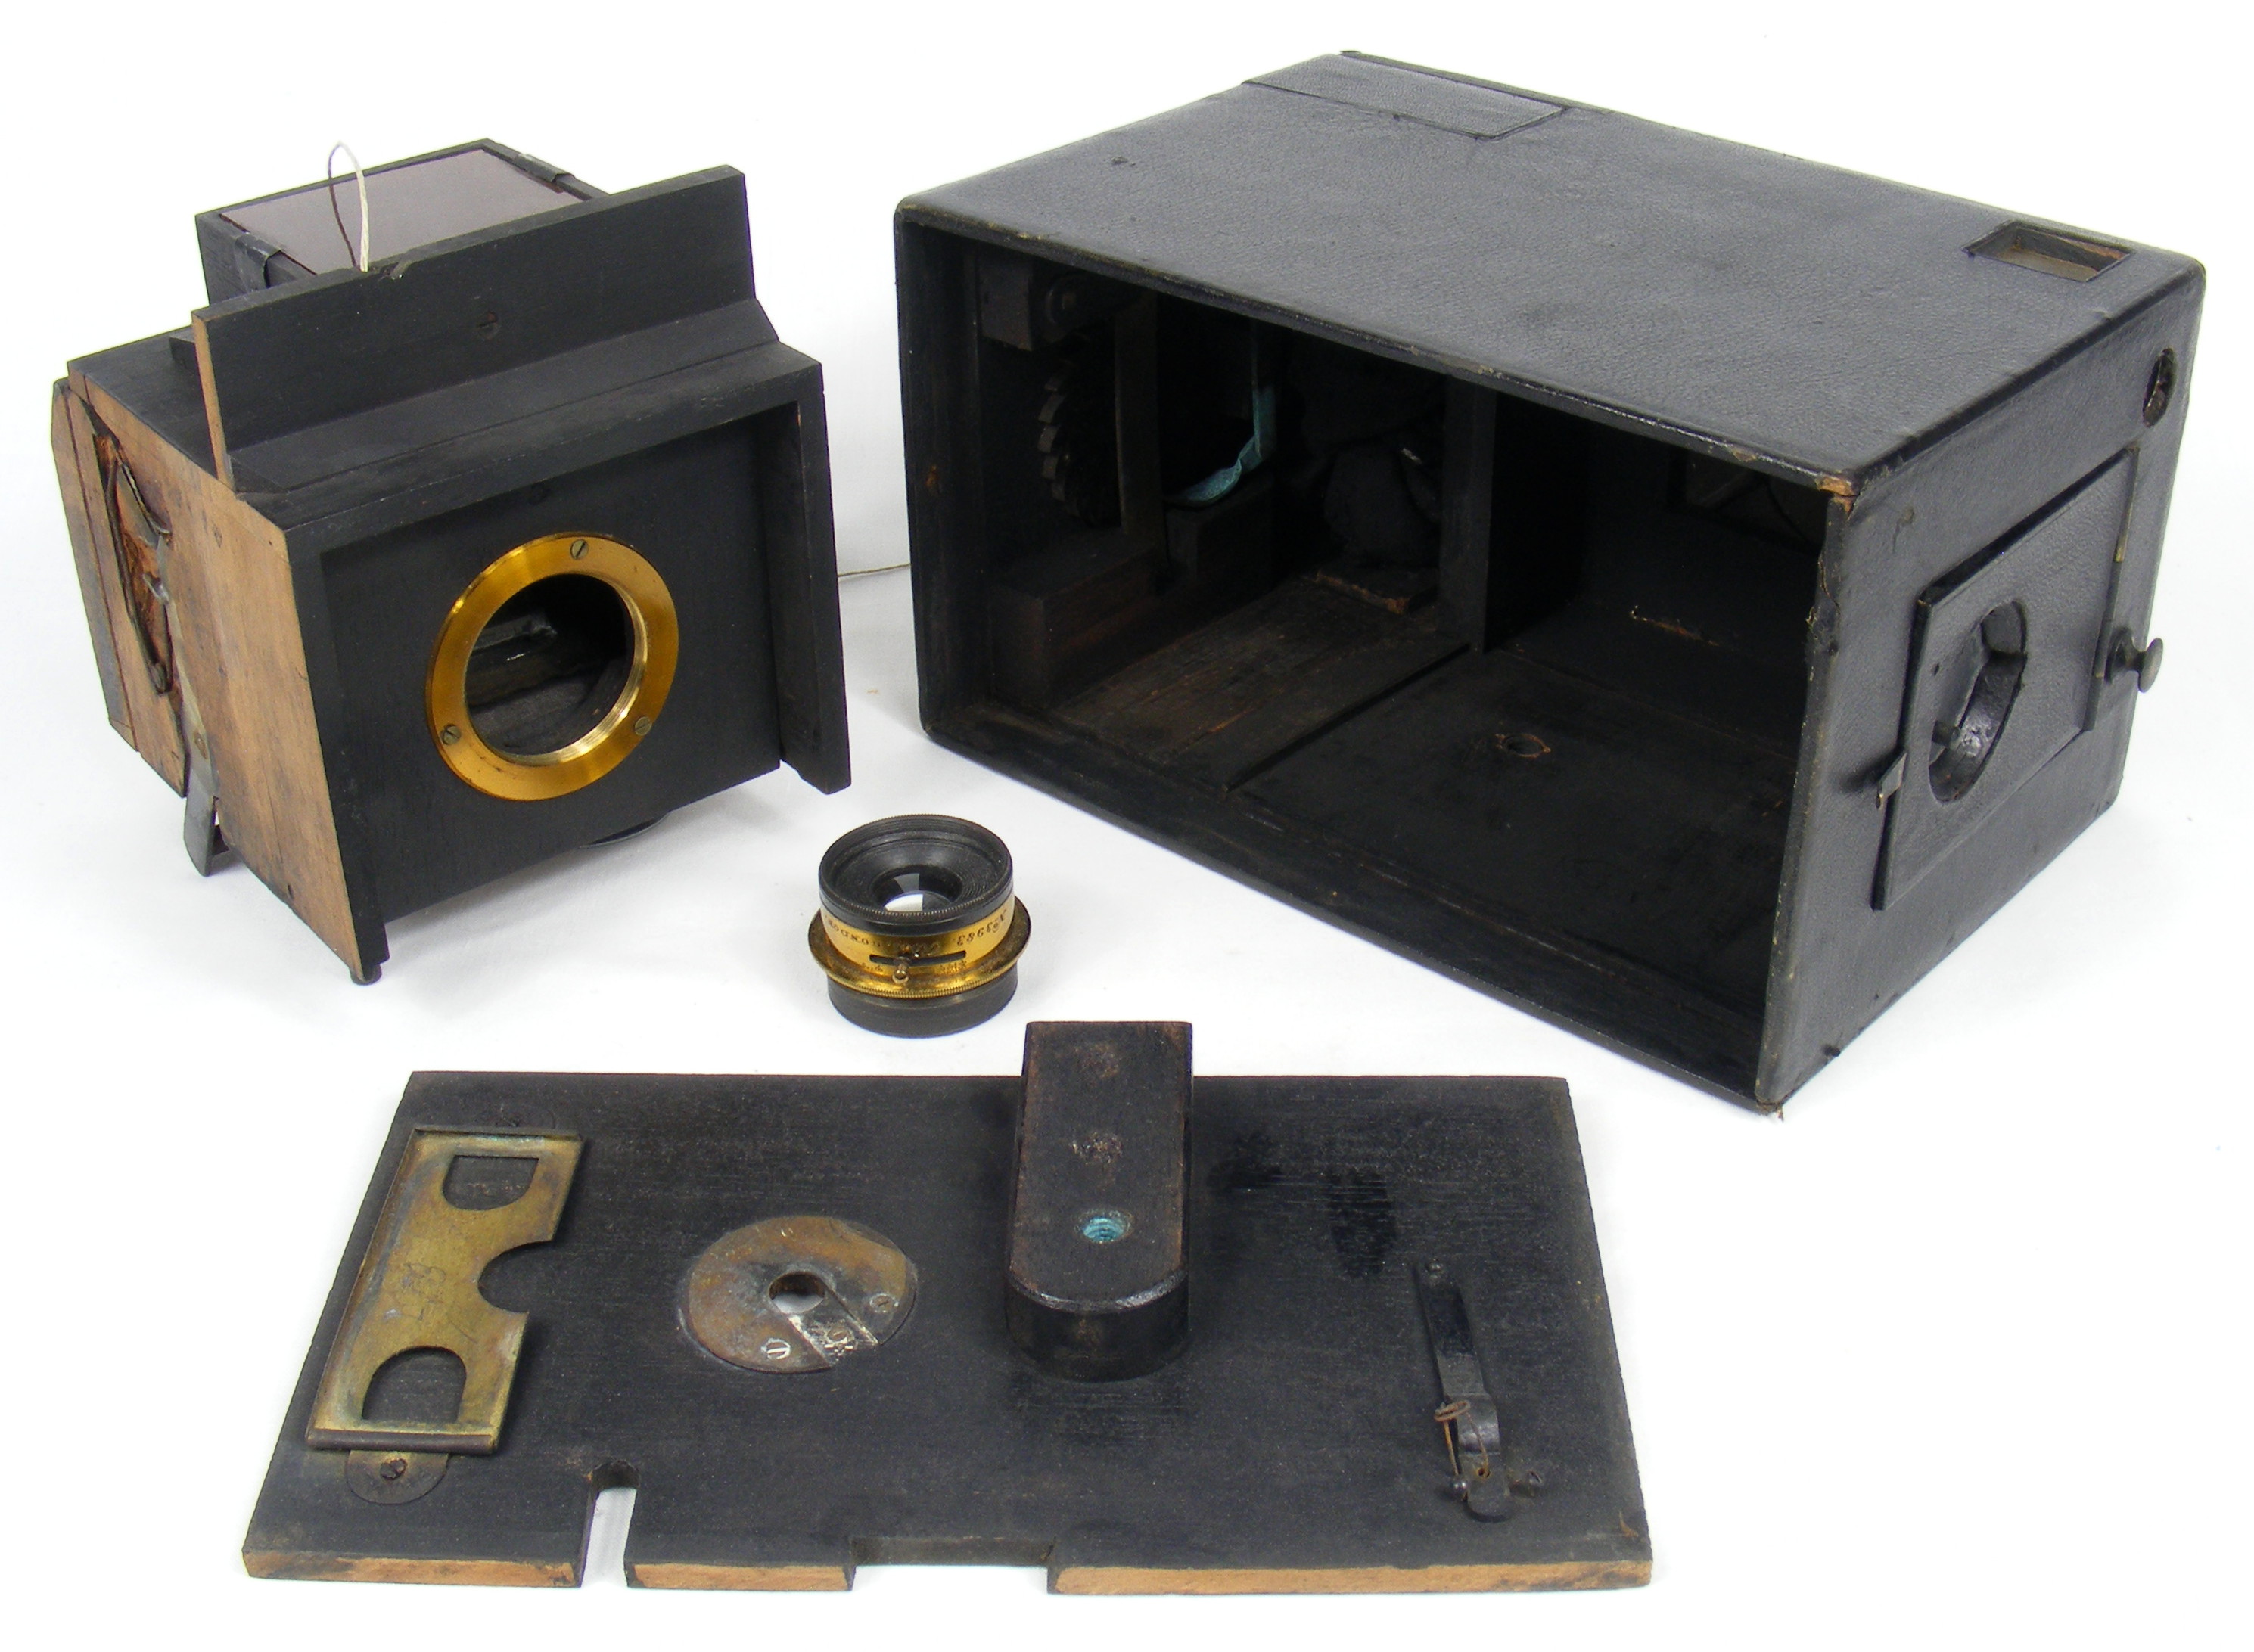 Image of Main components of Watson Vanneck camera